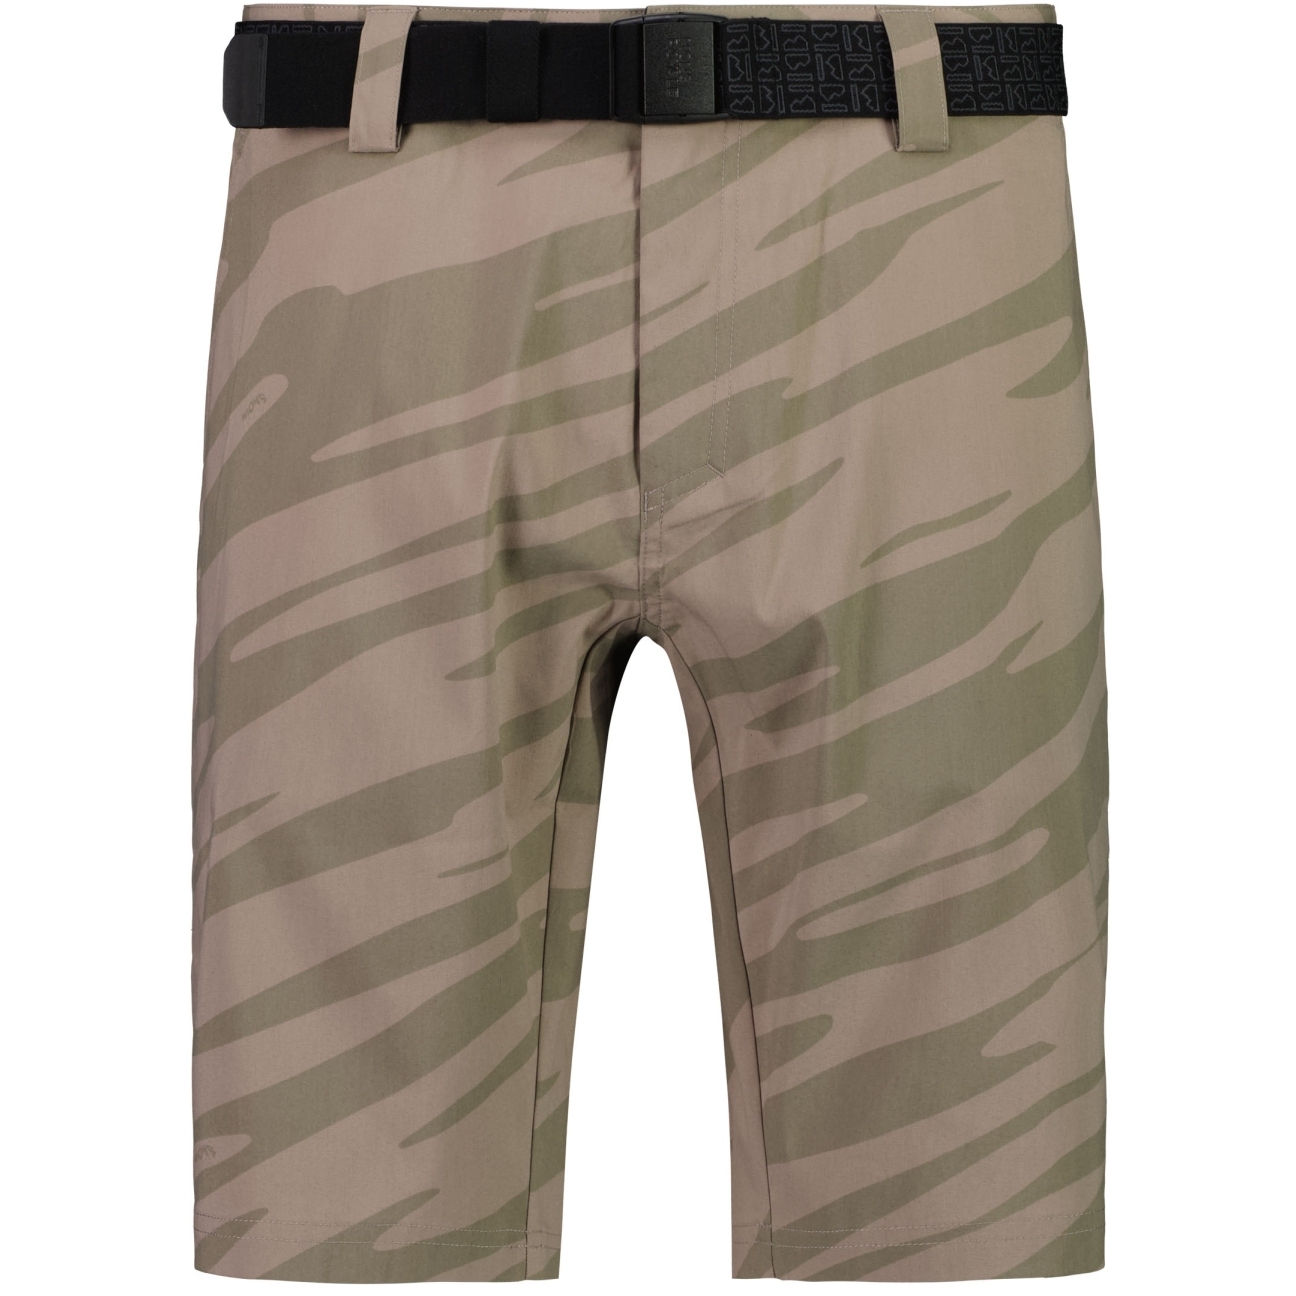 Picture of Mons Royale Drift Shorts - undercover camo